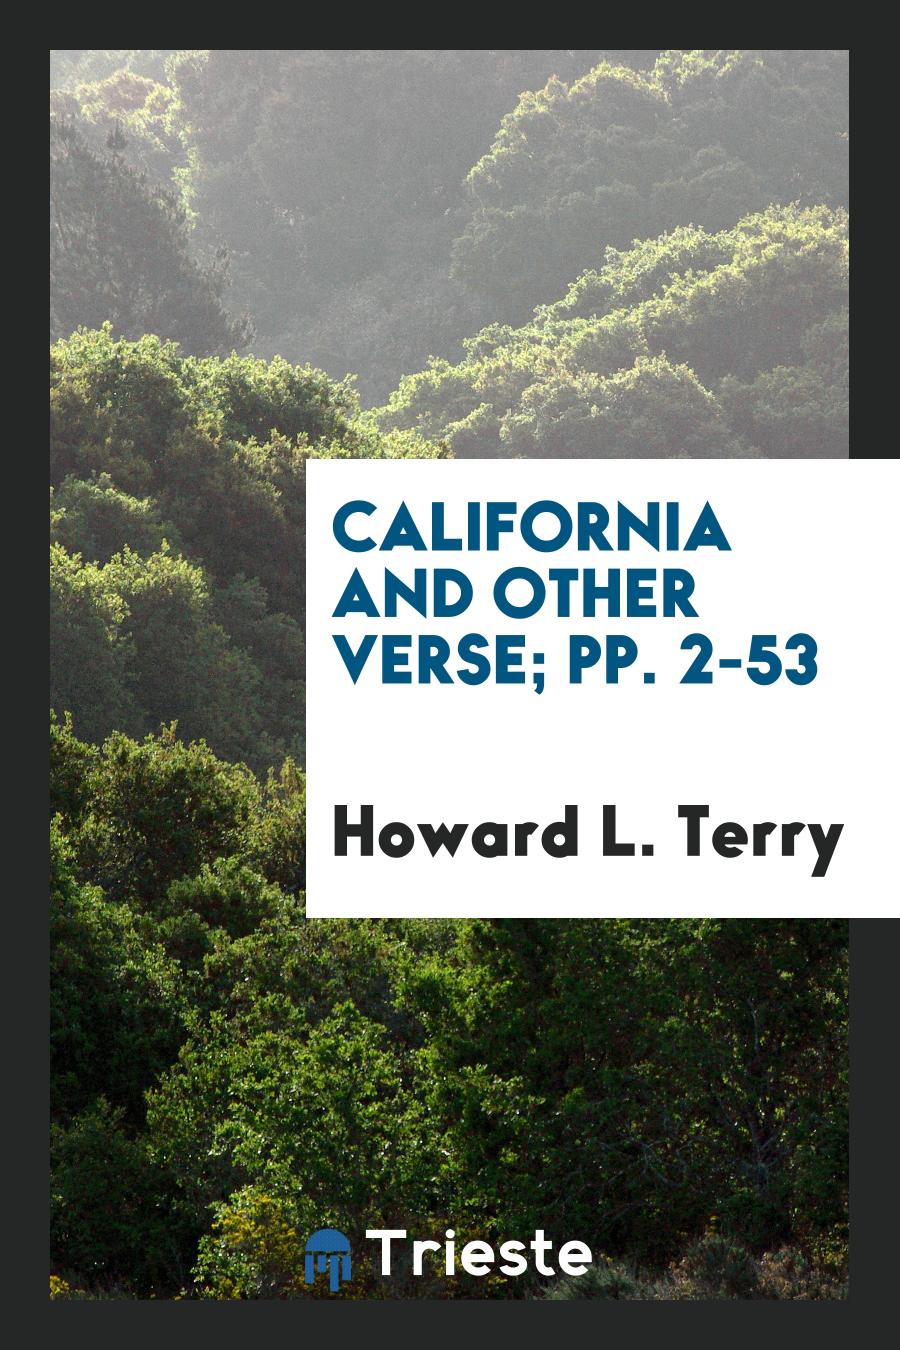 California and Other Verse; pp. 2-53